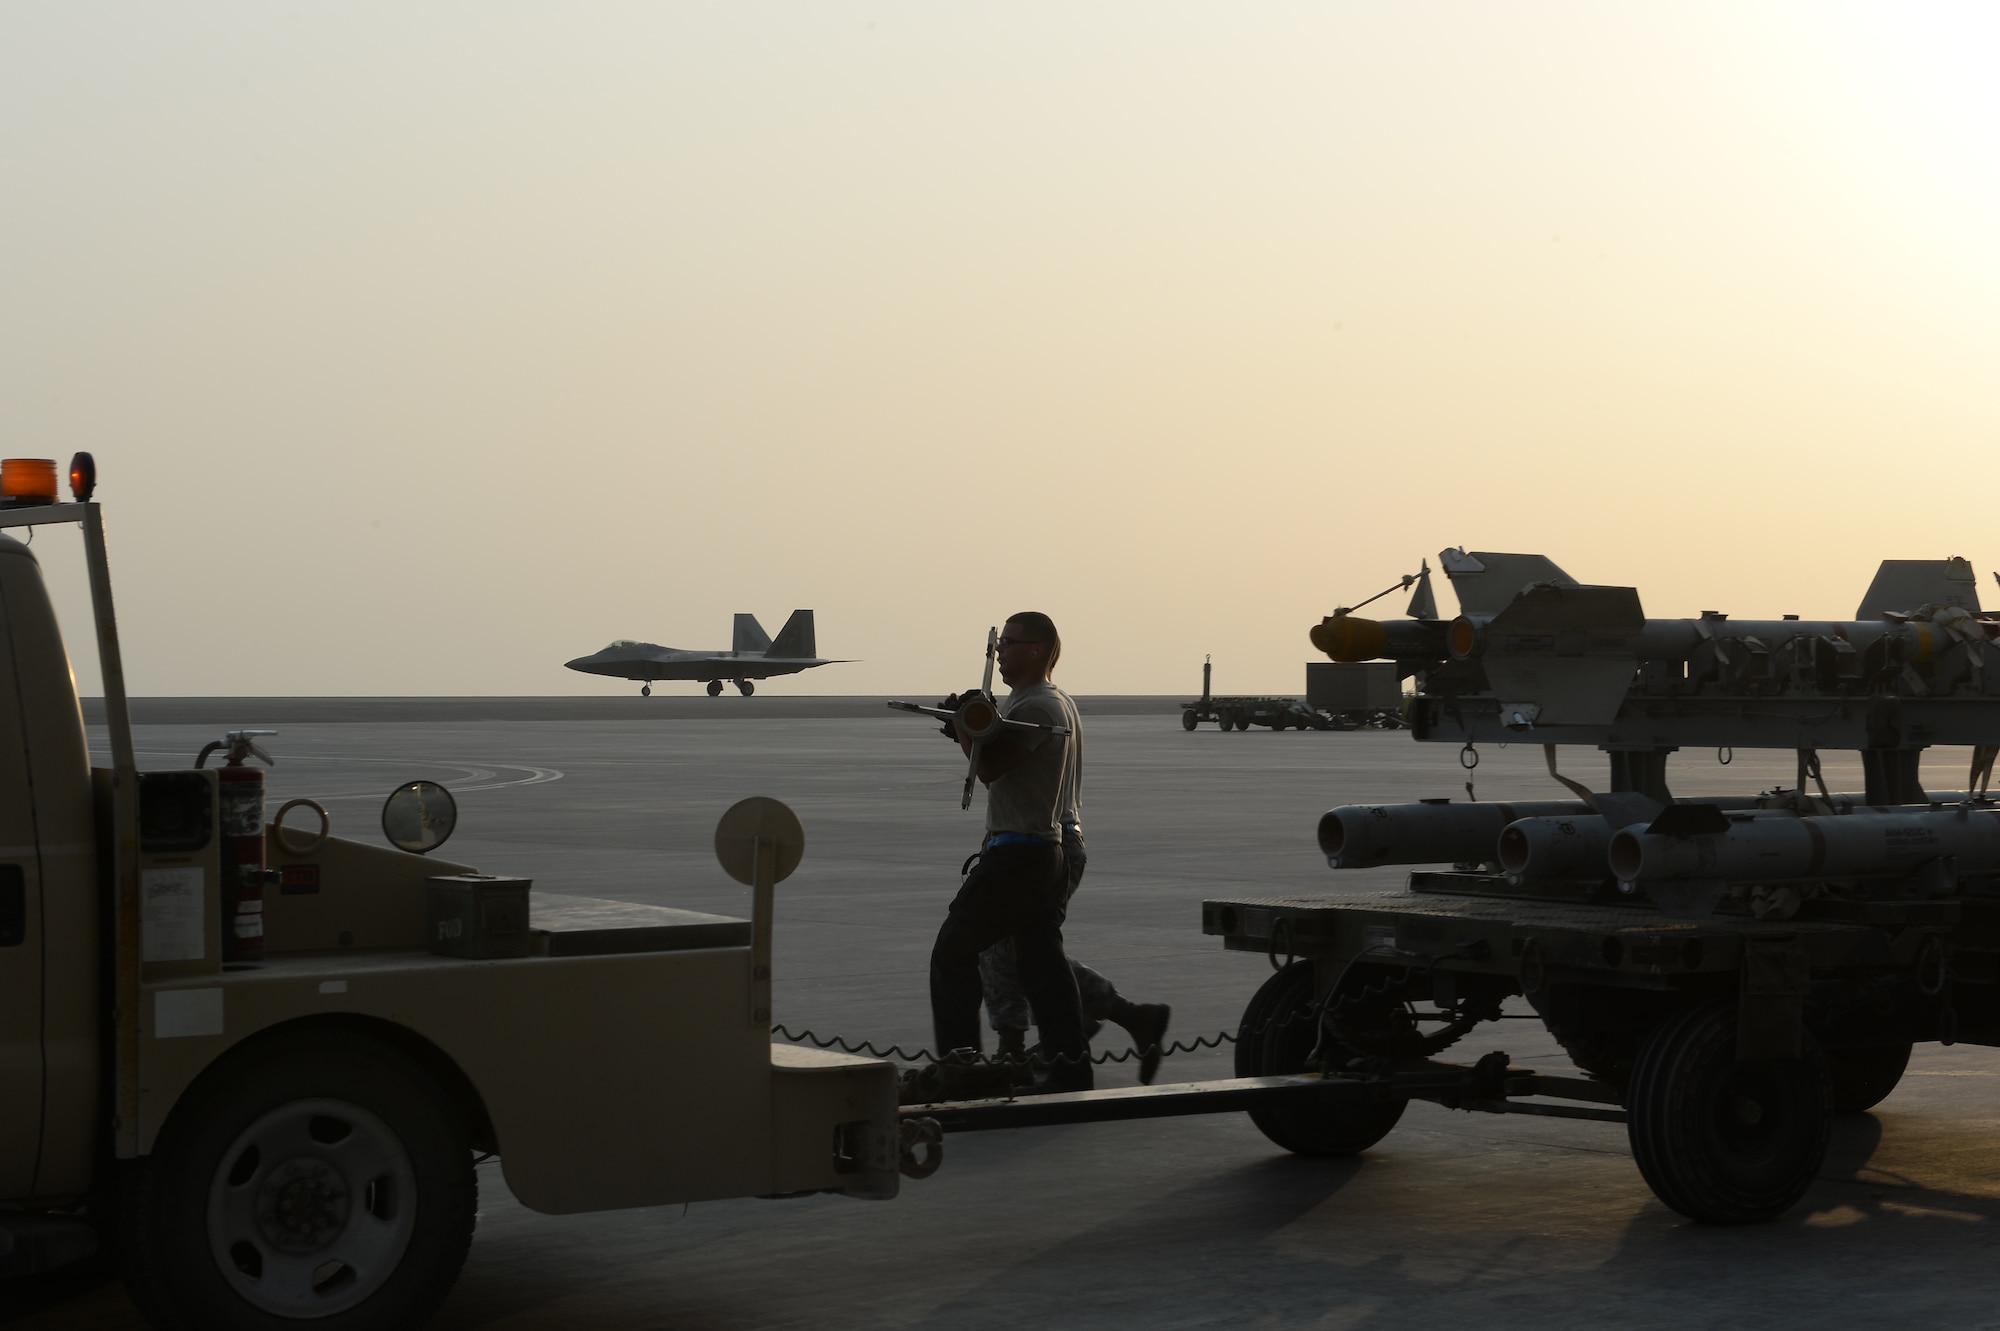 380th Expeditionary Maintenance Airmen prepare to load munitions on an F-22 Raptor while another F-22 Raptor taxis on the runway at an undisclosed location in Southwest Asia, August 30, 2015. The F-22’s combination of sensor capability, integrated avionics, situational awareness, and weapons provides first-kill opportunity against threats. (U.S. Air Force photo/ Staff Sgt. Sandra Welch)